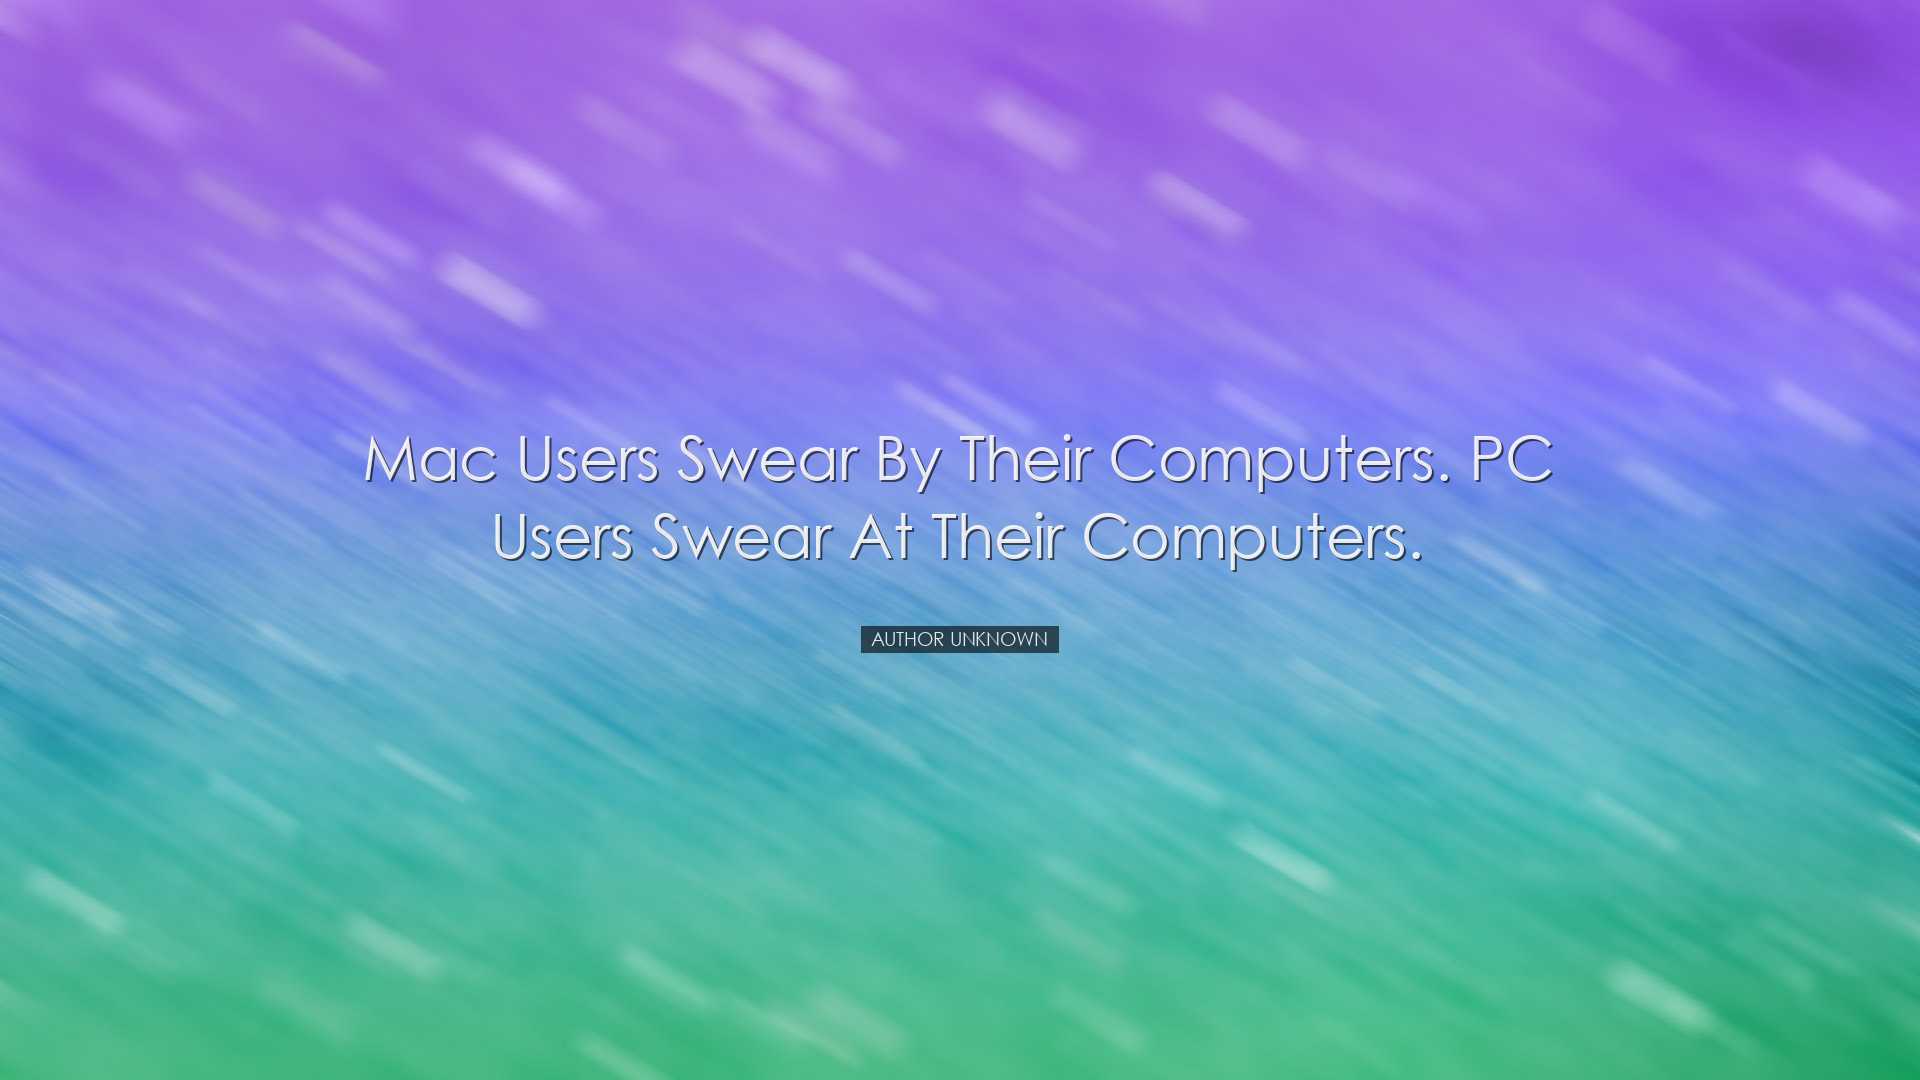 Mac users swear by their computers. PC users swear at their comput